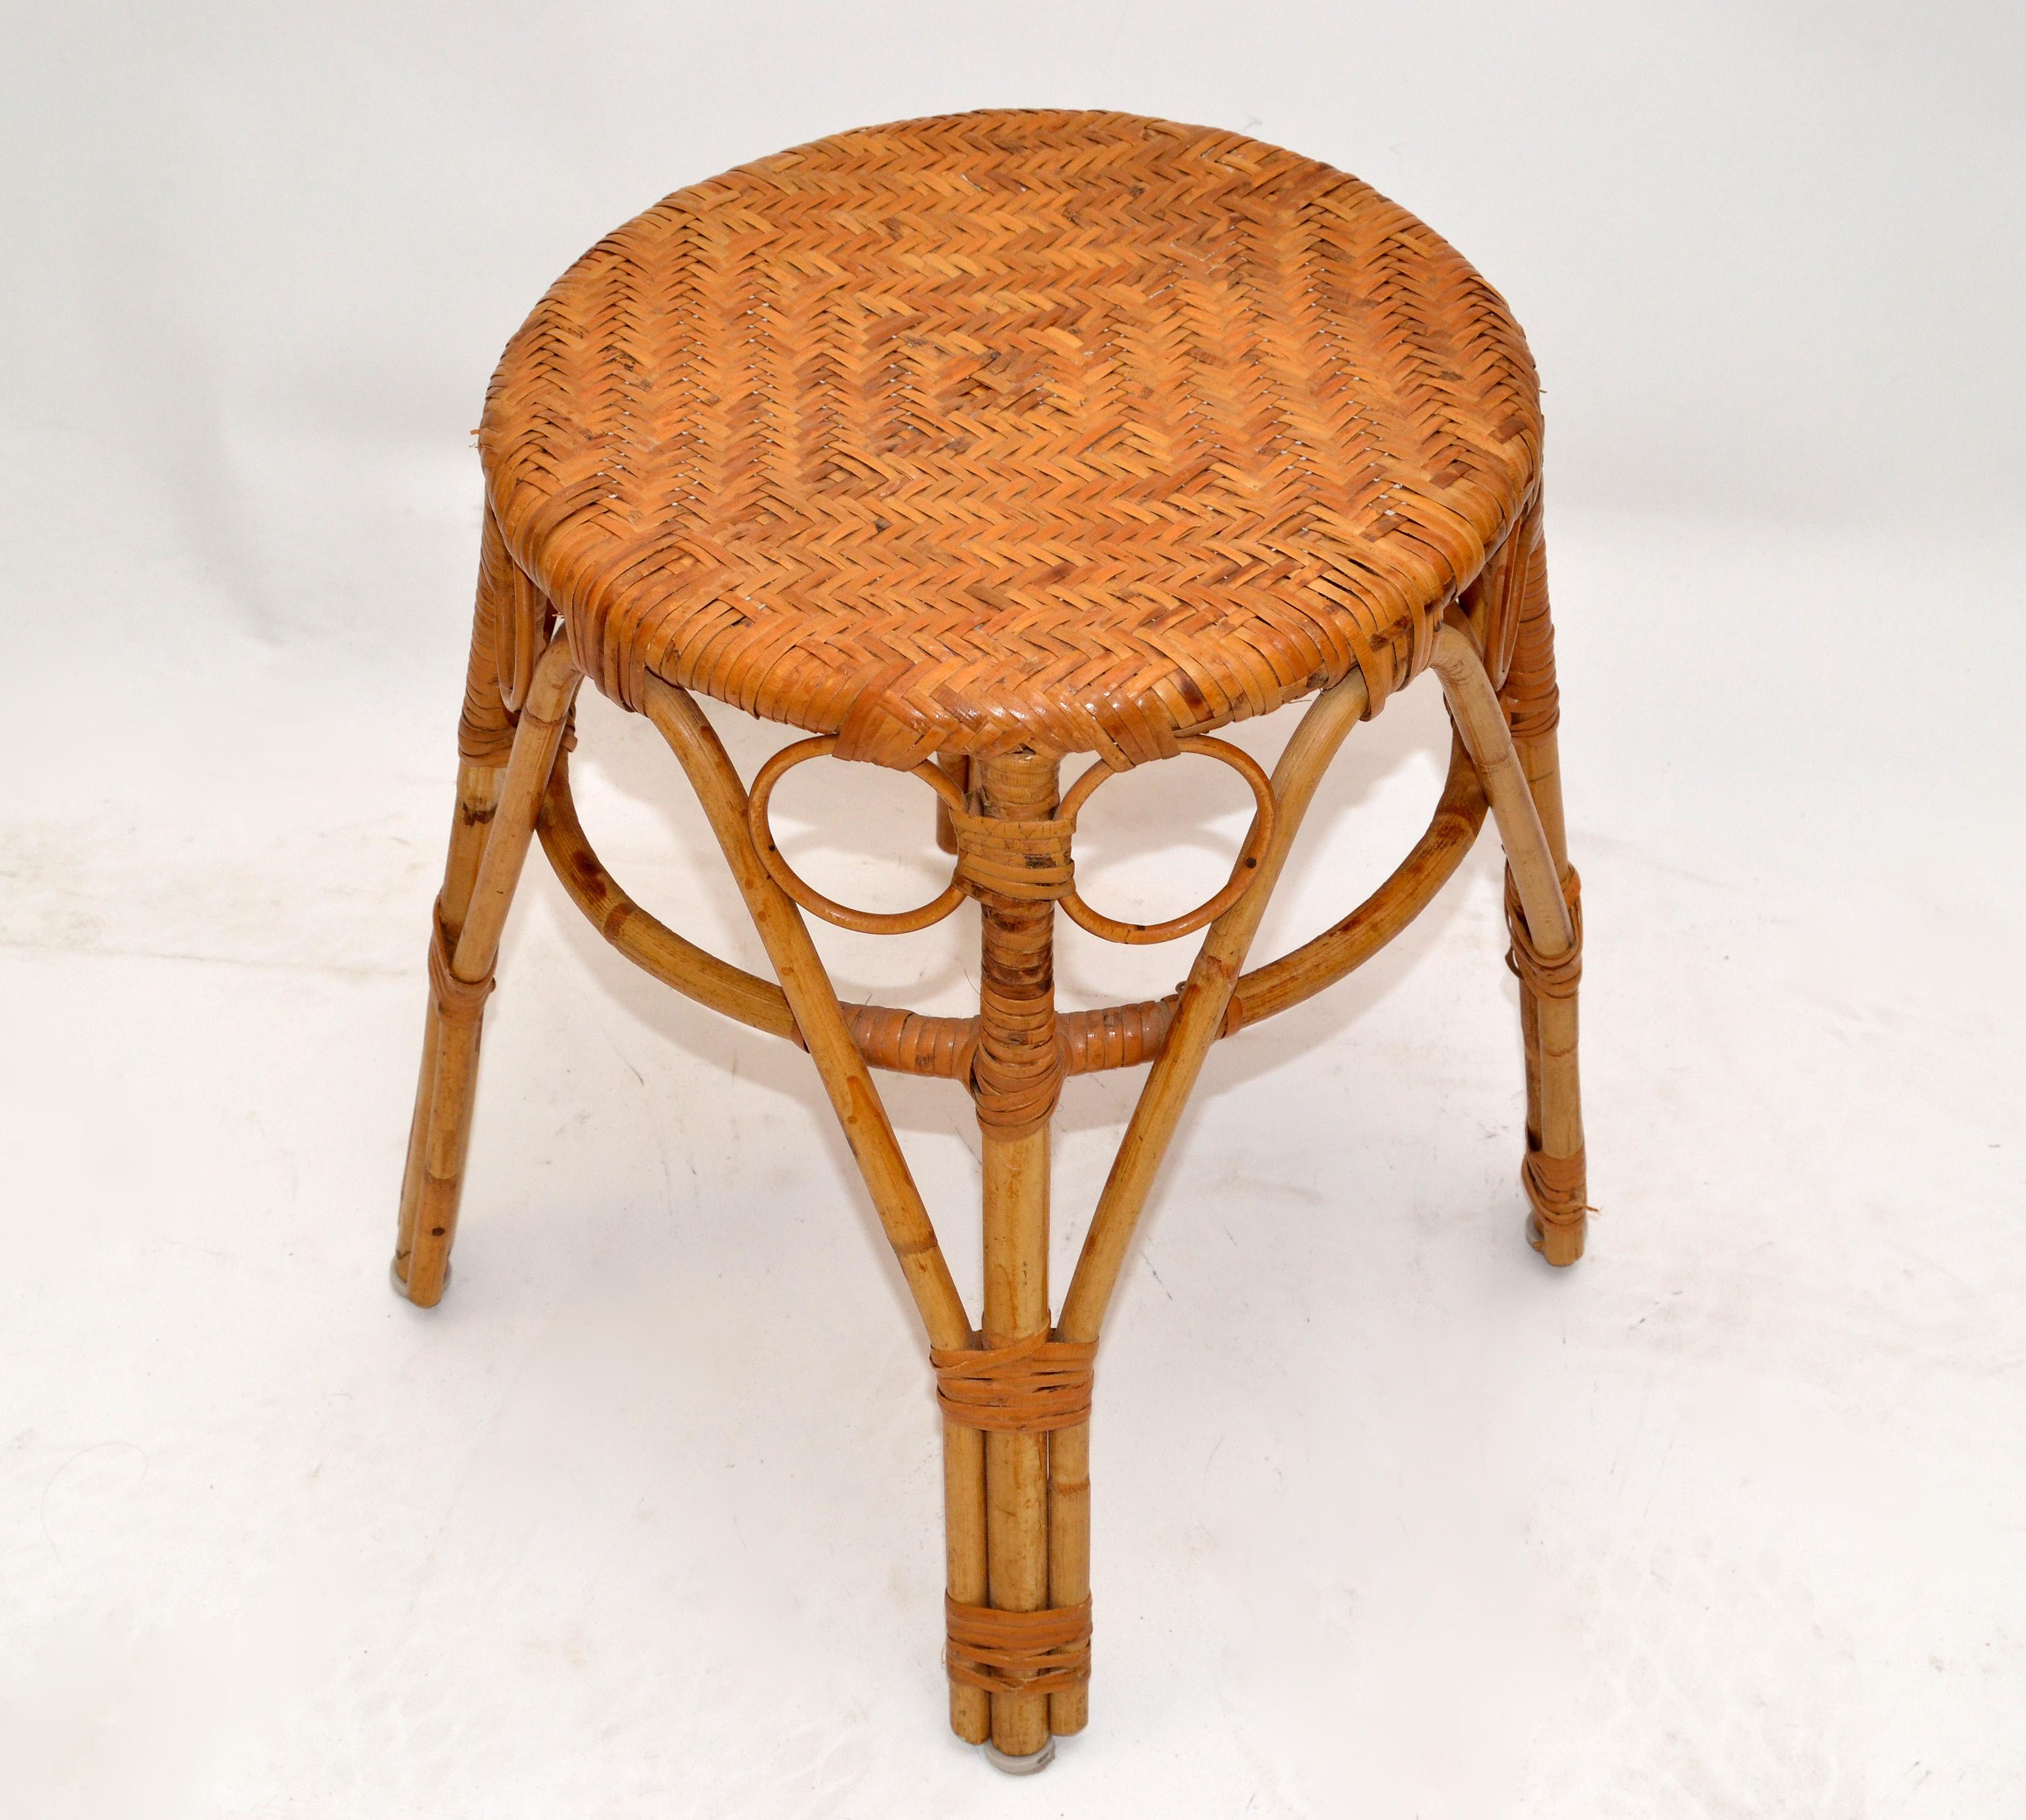 Vintage Bohemian Chic Woven Blonde Bamboo and Rattan Stool For Sale 4